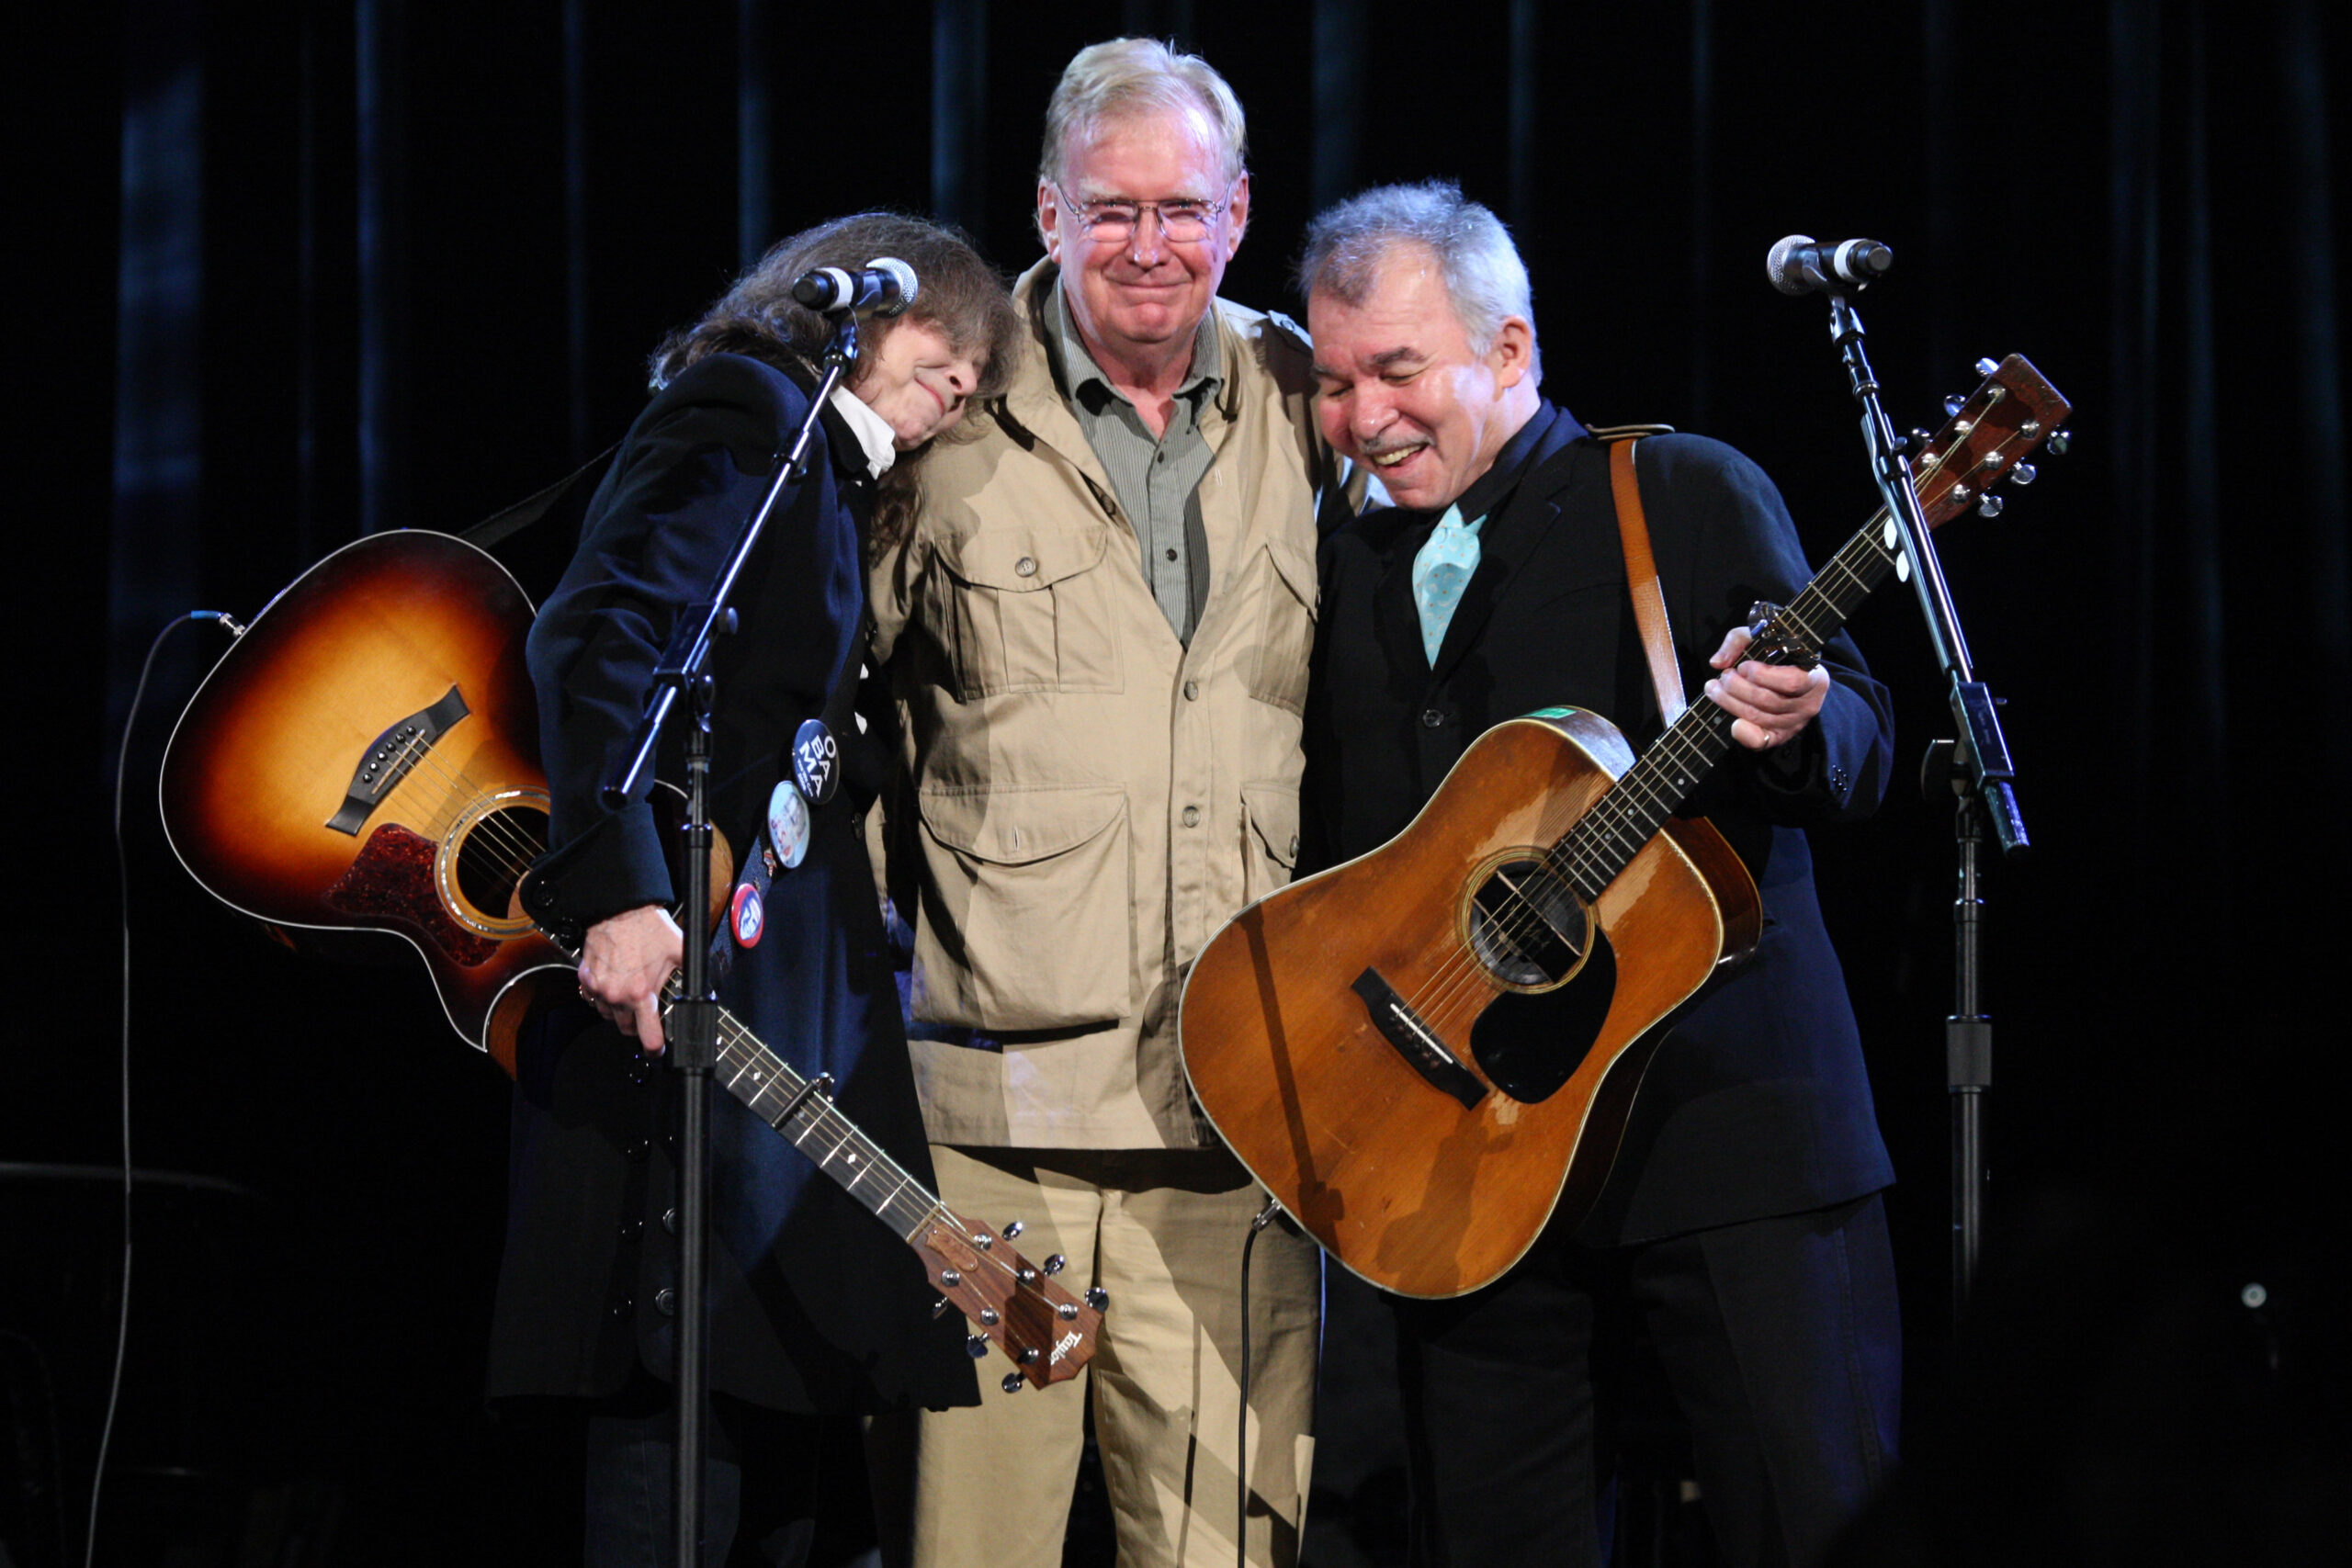 Nanci Griffith, Jim Rooney, and John Prine at the 2009 Americana Music Association awards show